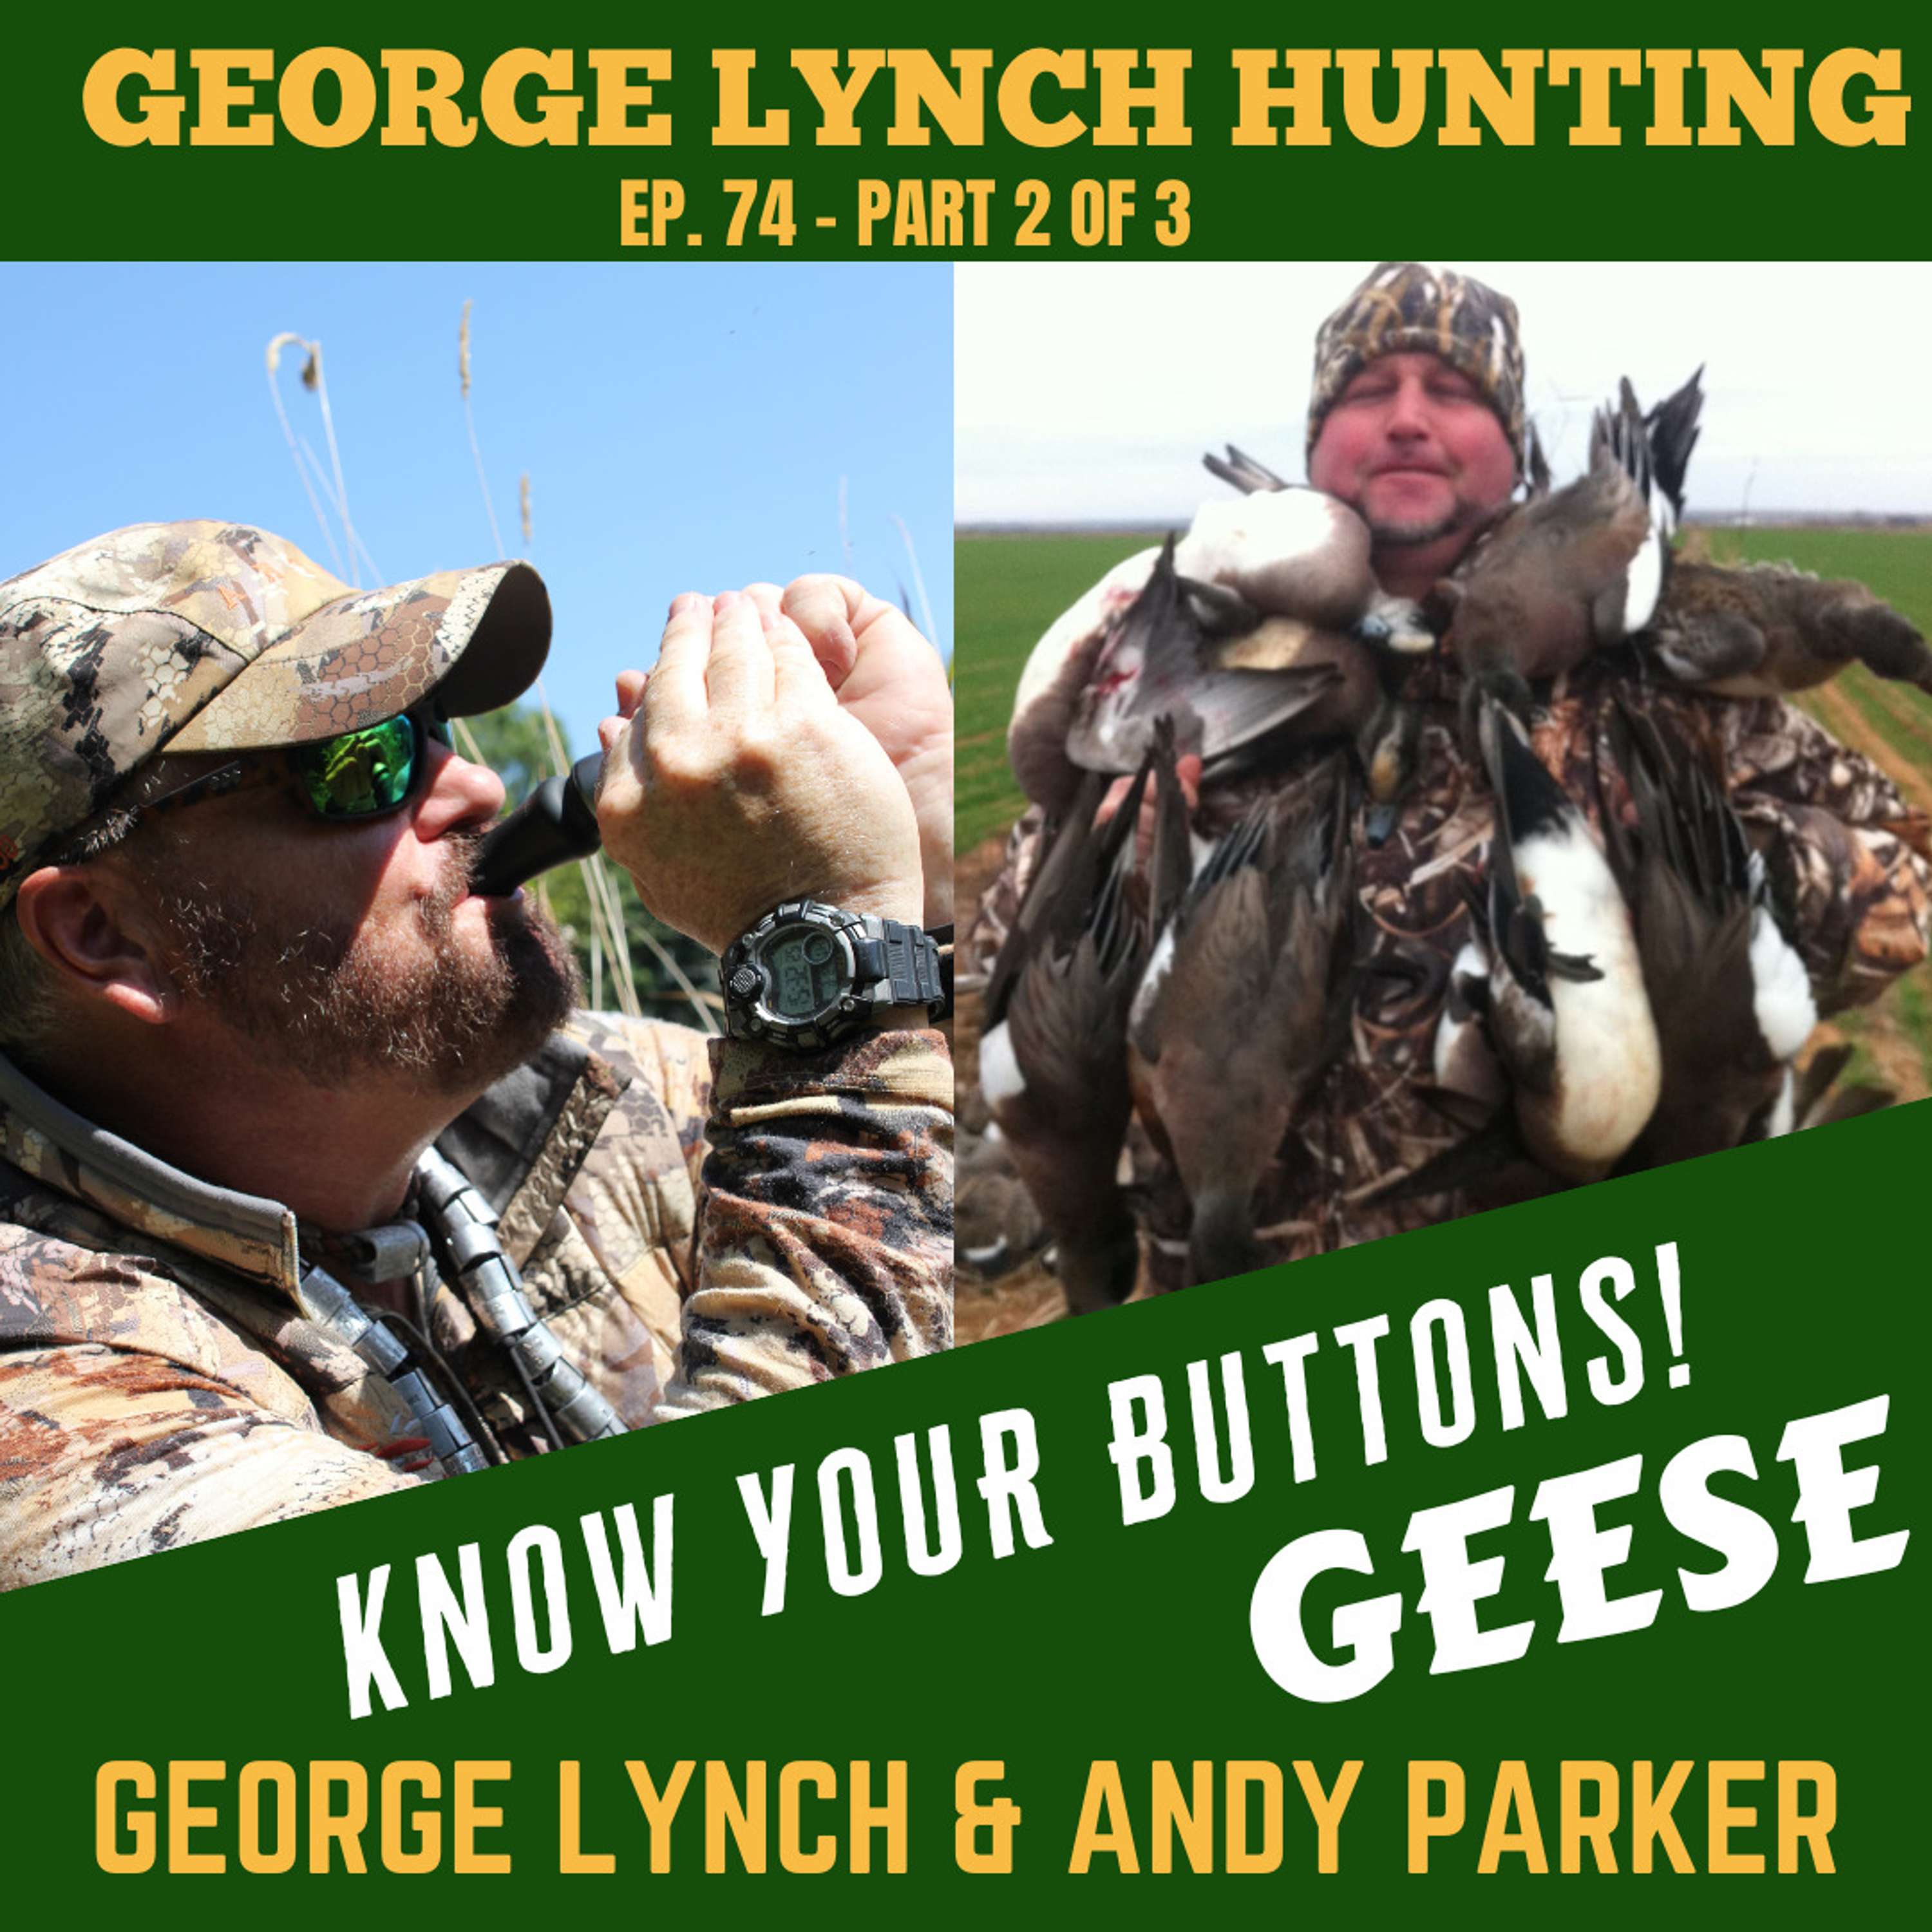 KNOW YOUR BUTTONS! GOOSE CALLING! 2 of 3 with Andy Parker